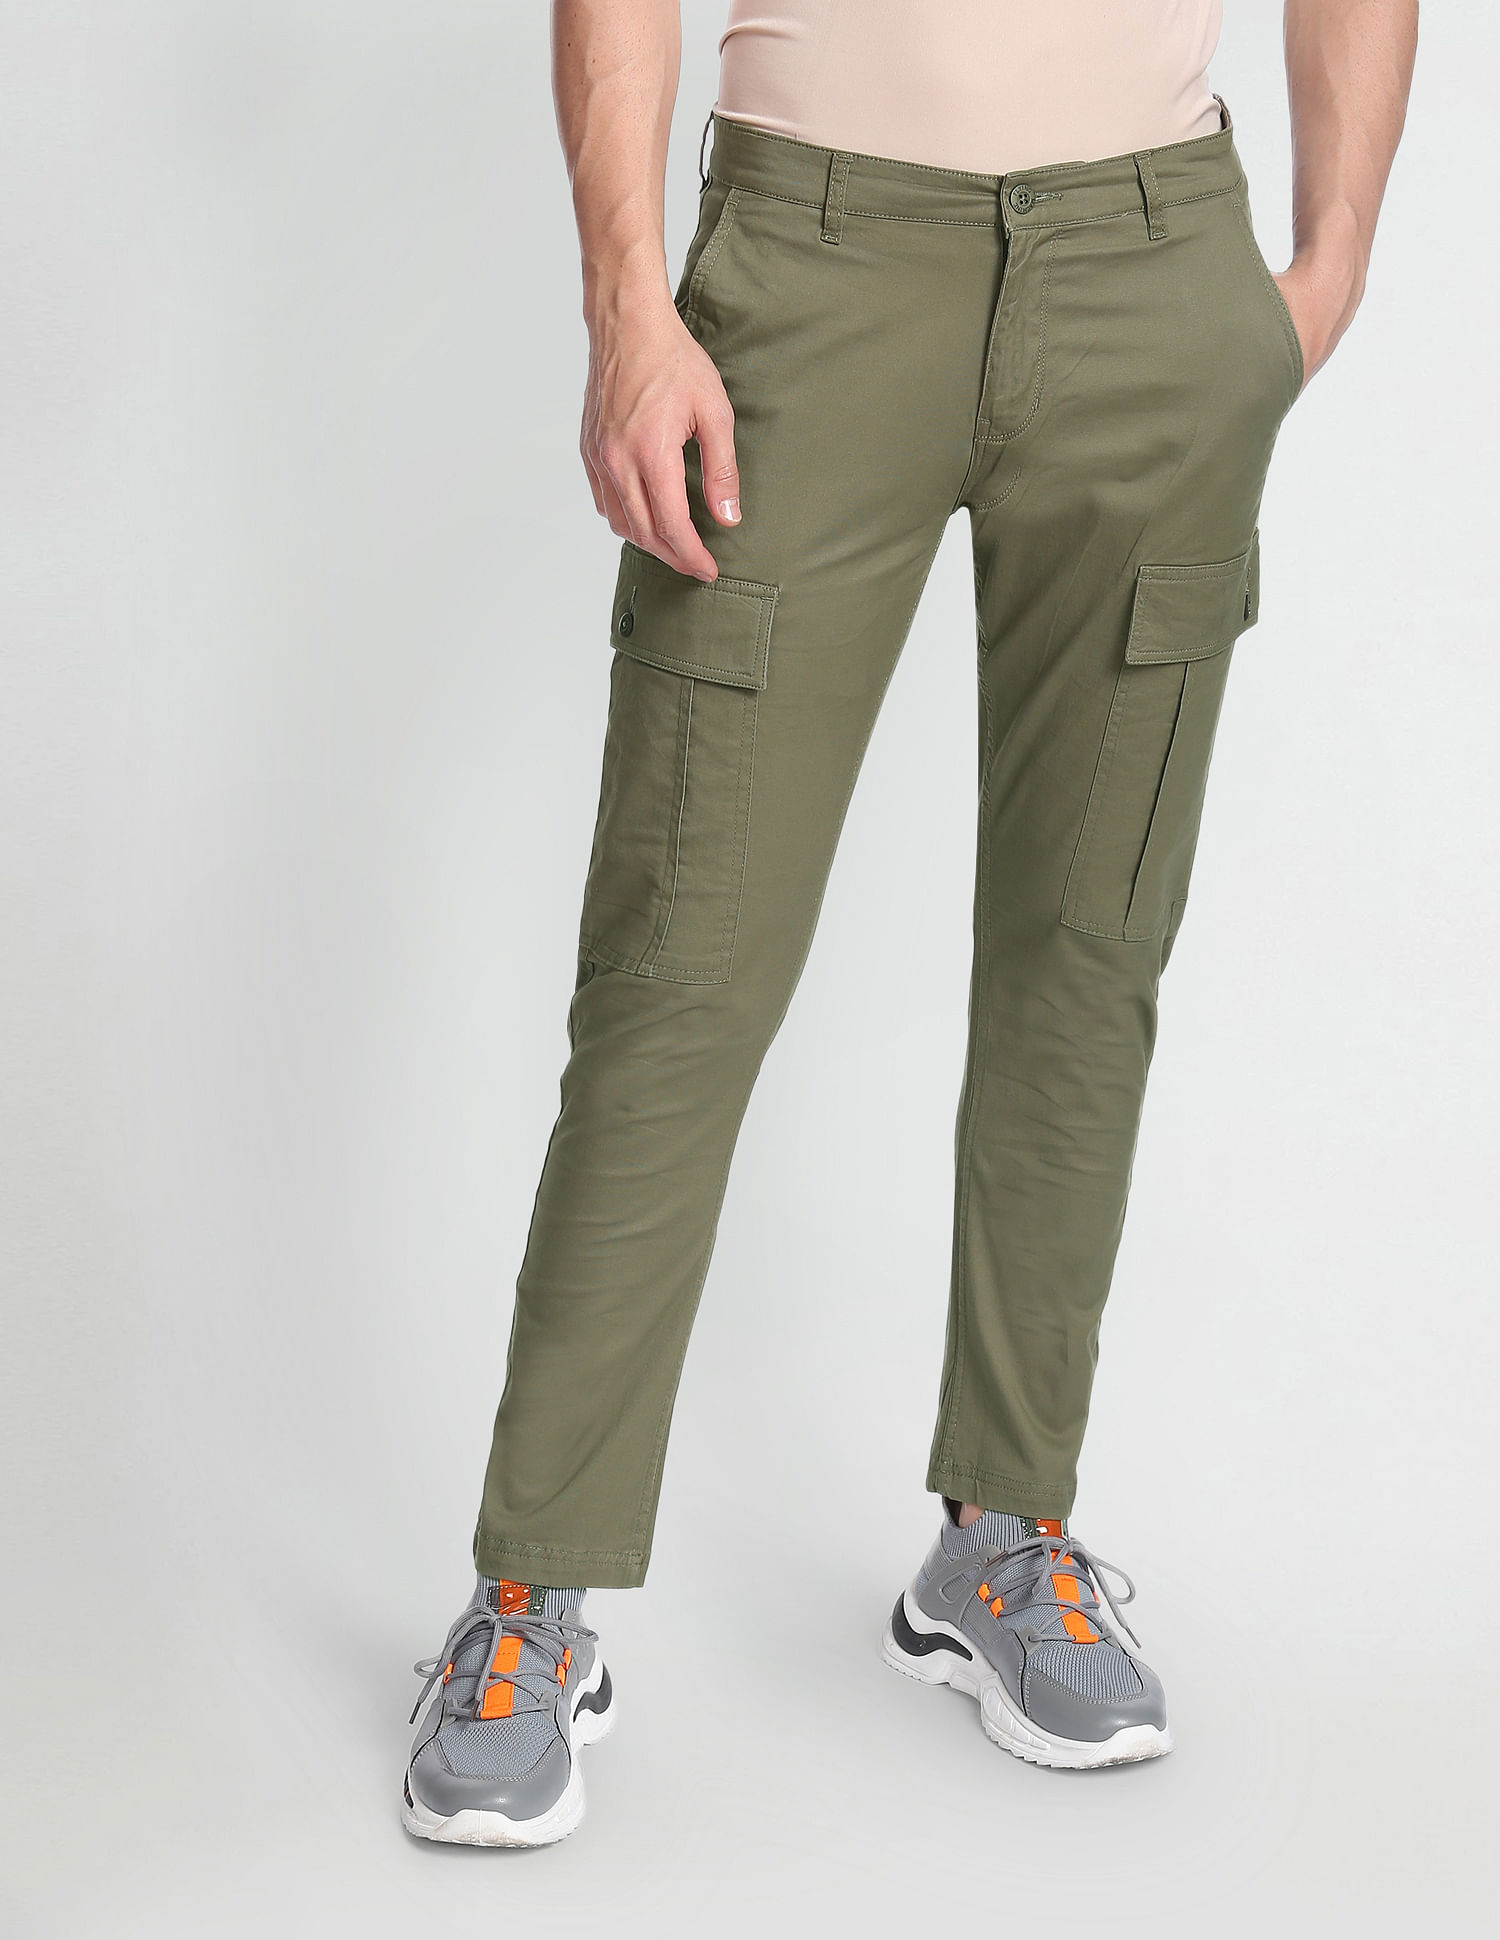 Buy FLYING MACHINE Solid Cotton Nylon Regular Fit Men's Casual Trousers |  Shoppers Stop